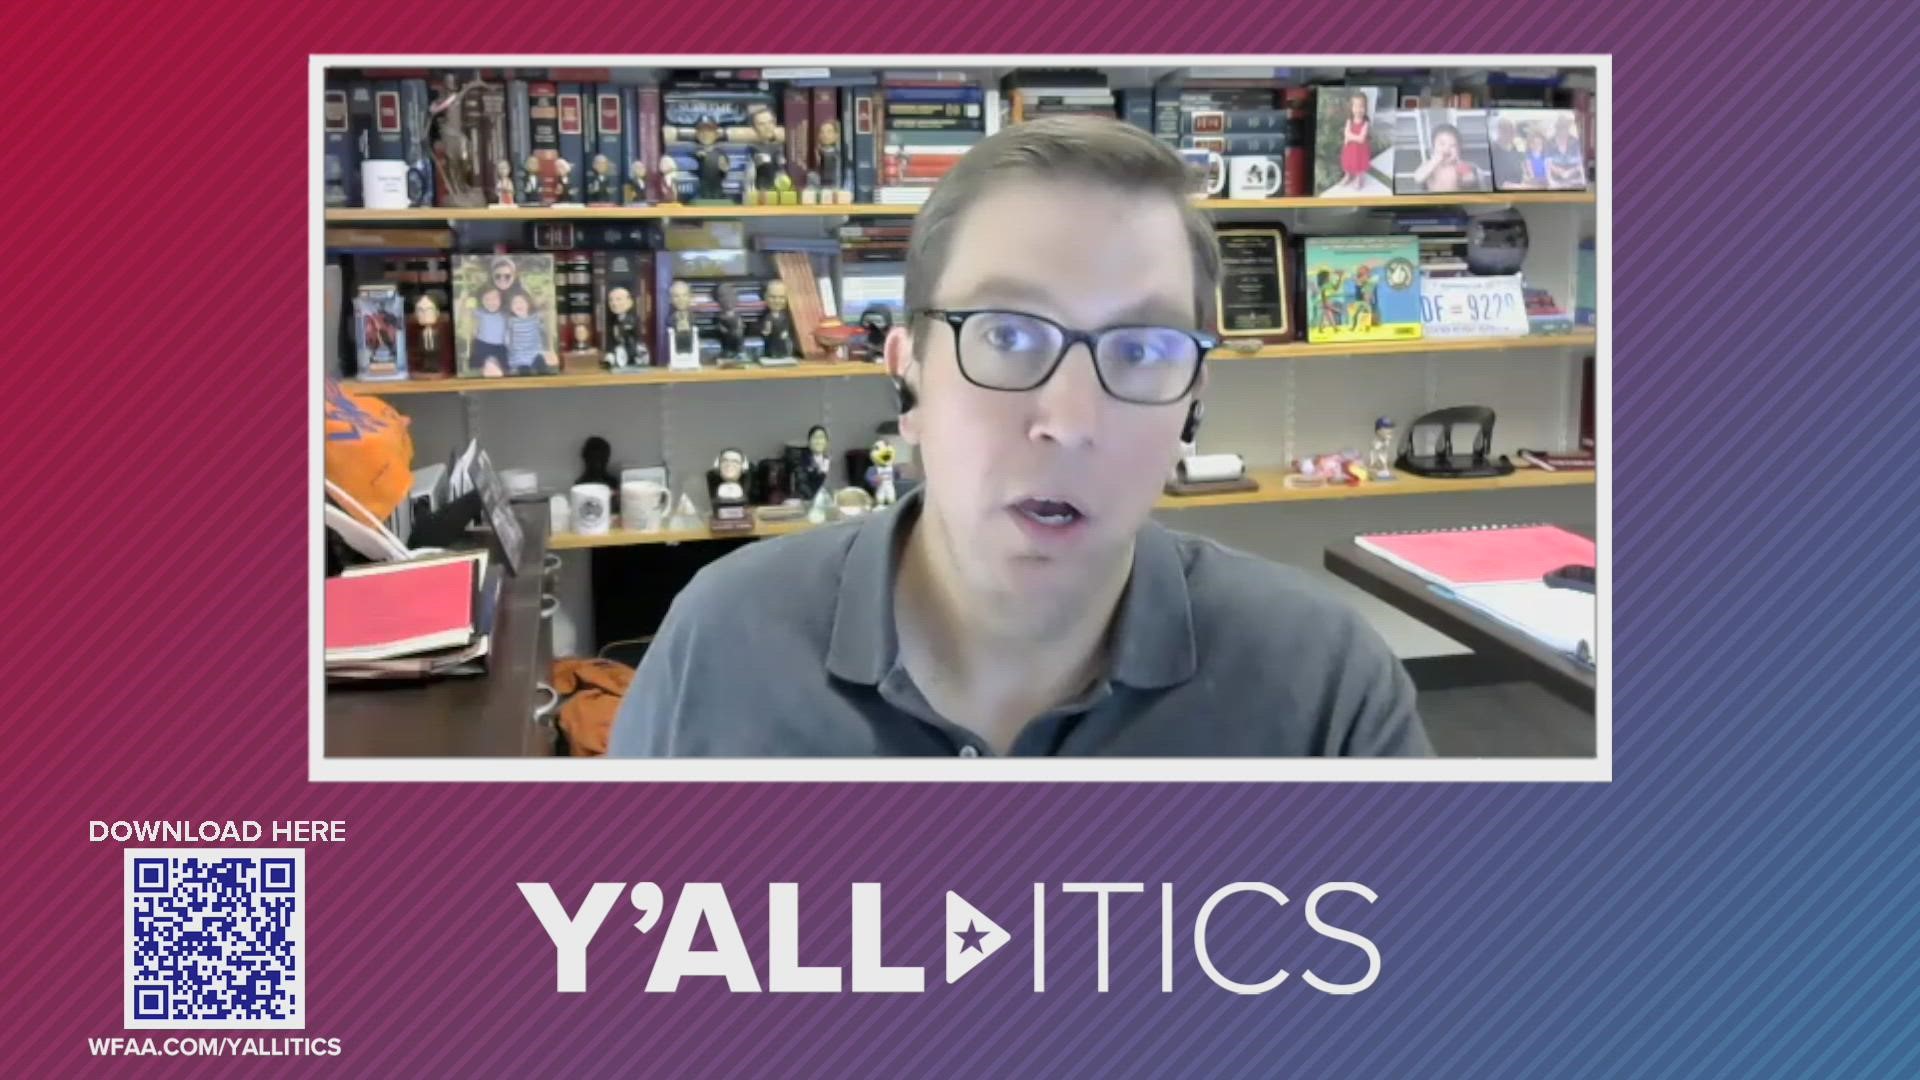 In this episode of Y’all-itics, the Jasons call up Stephen Vladeck, a constitutional law expert at the University of Texas, to cut through the legalese.